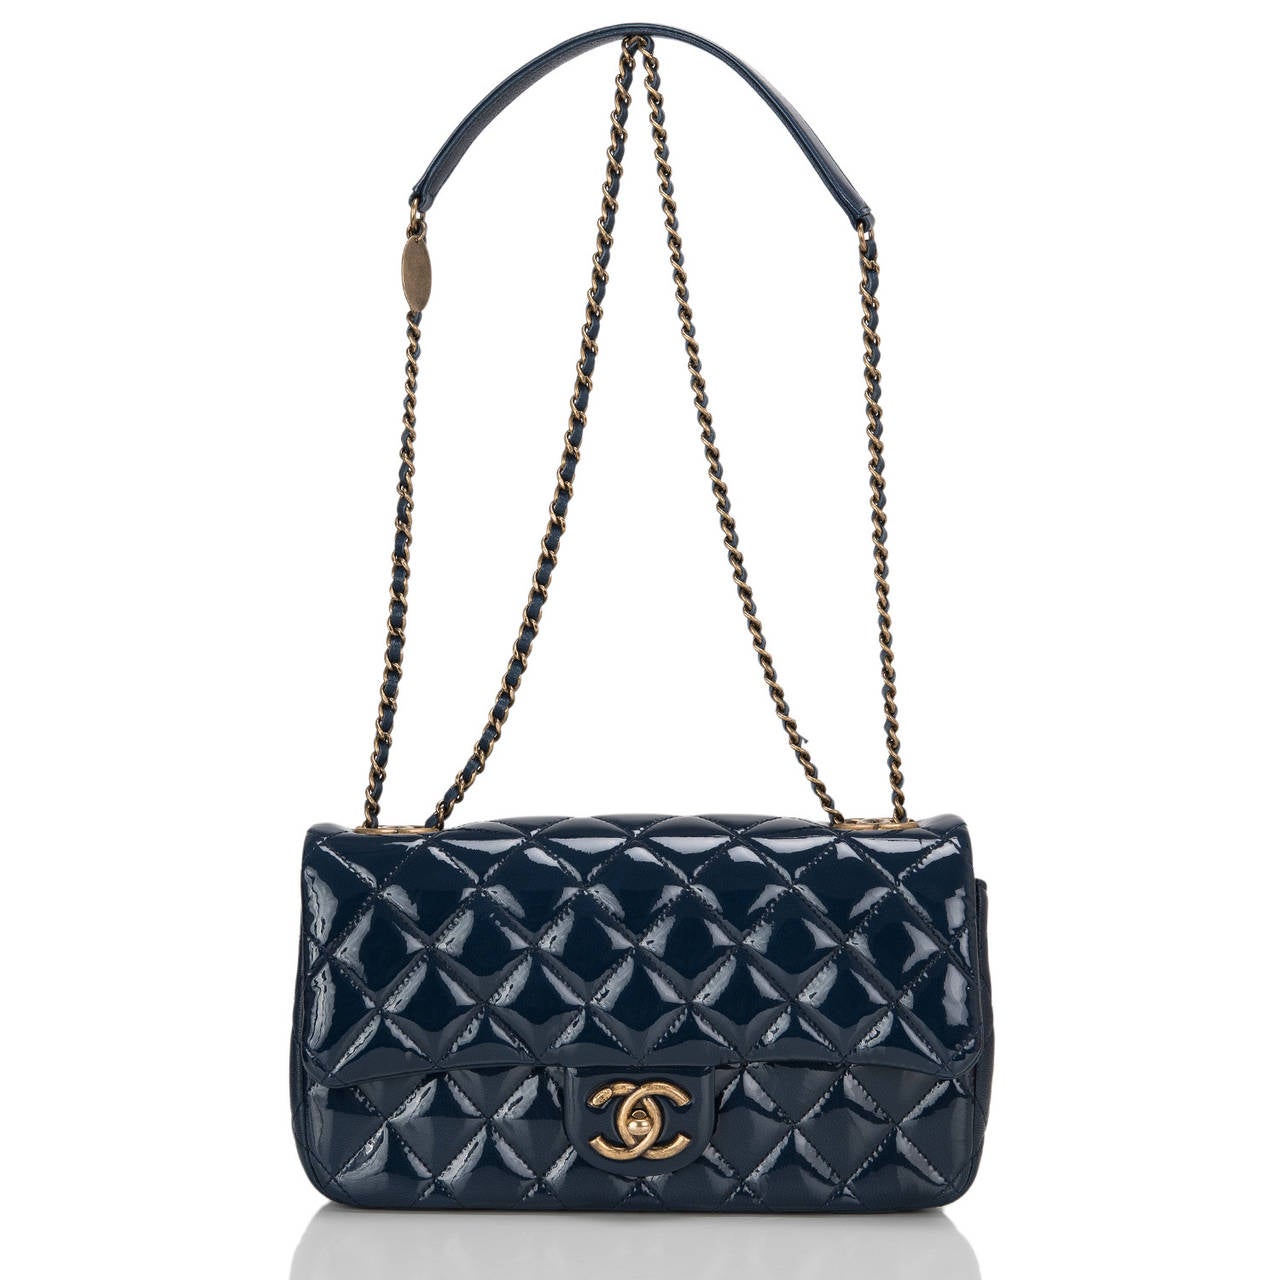 Women's Chanel Navy Quilted Patent Eyelet Flap Bag